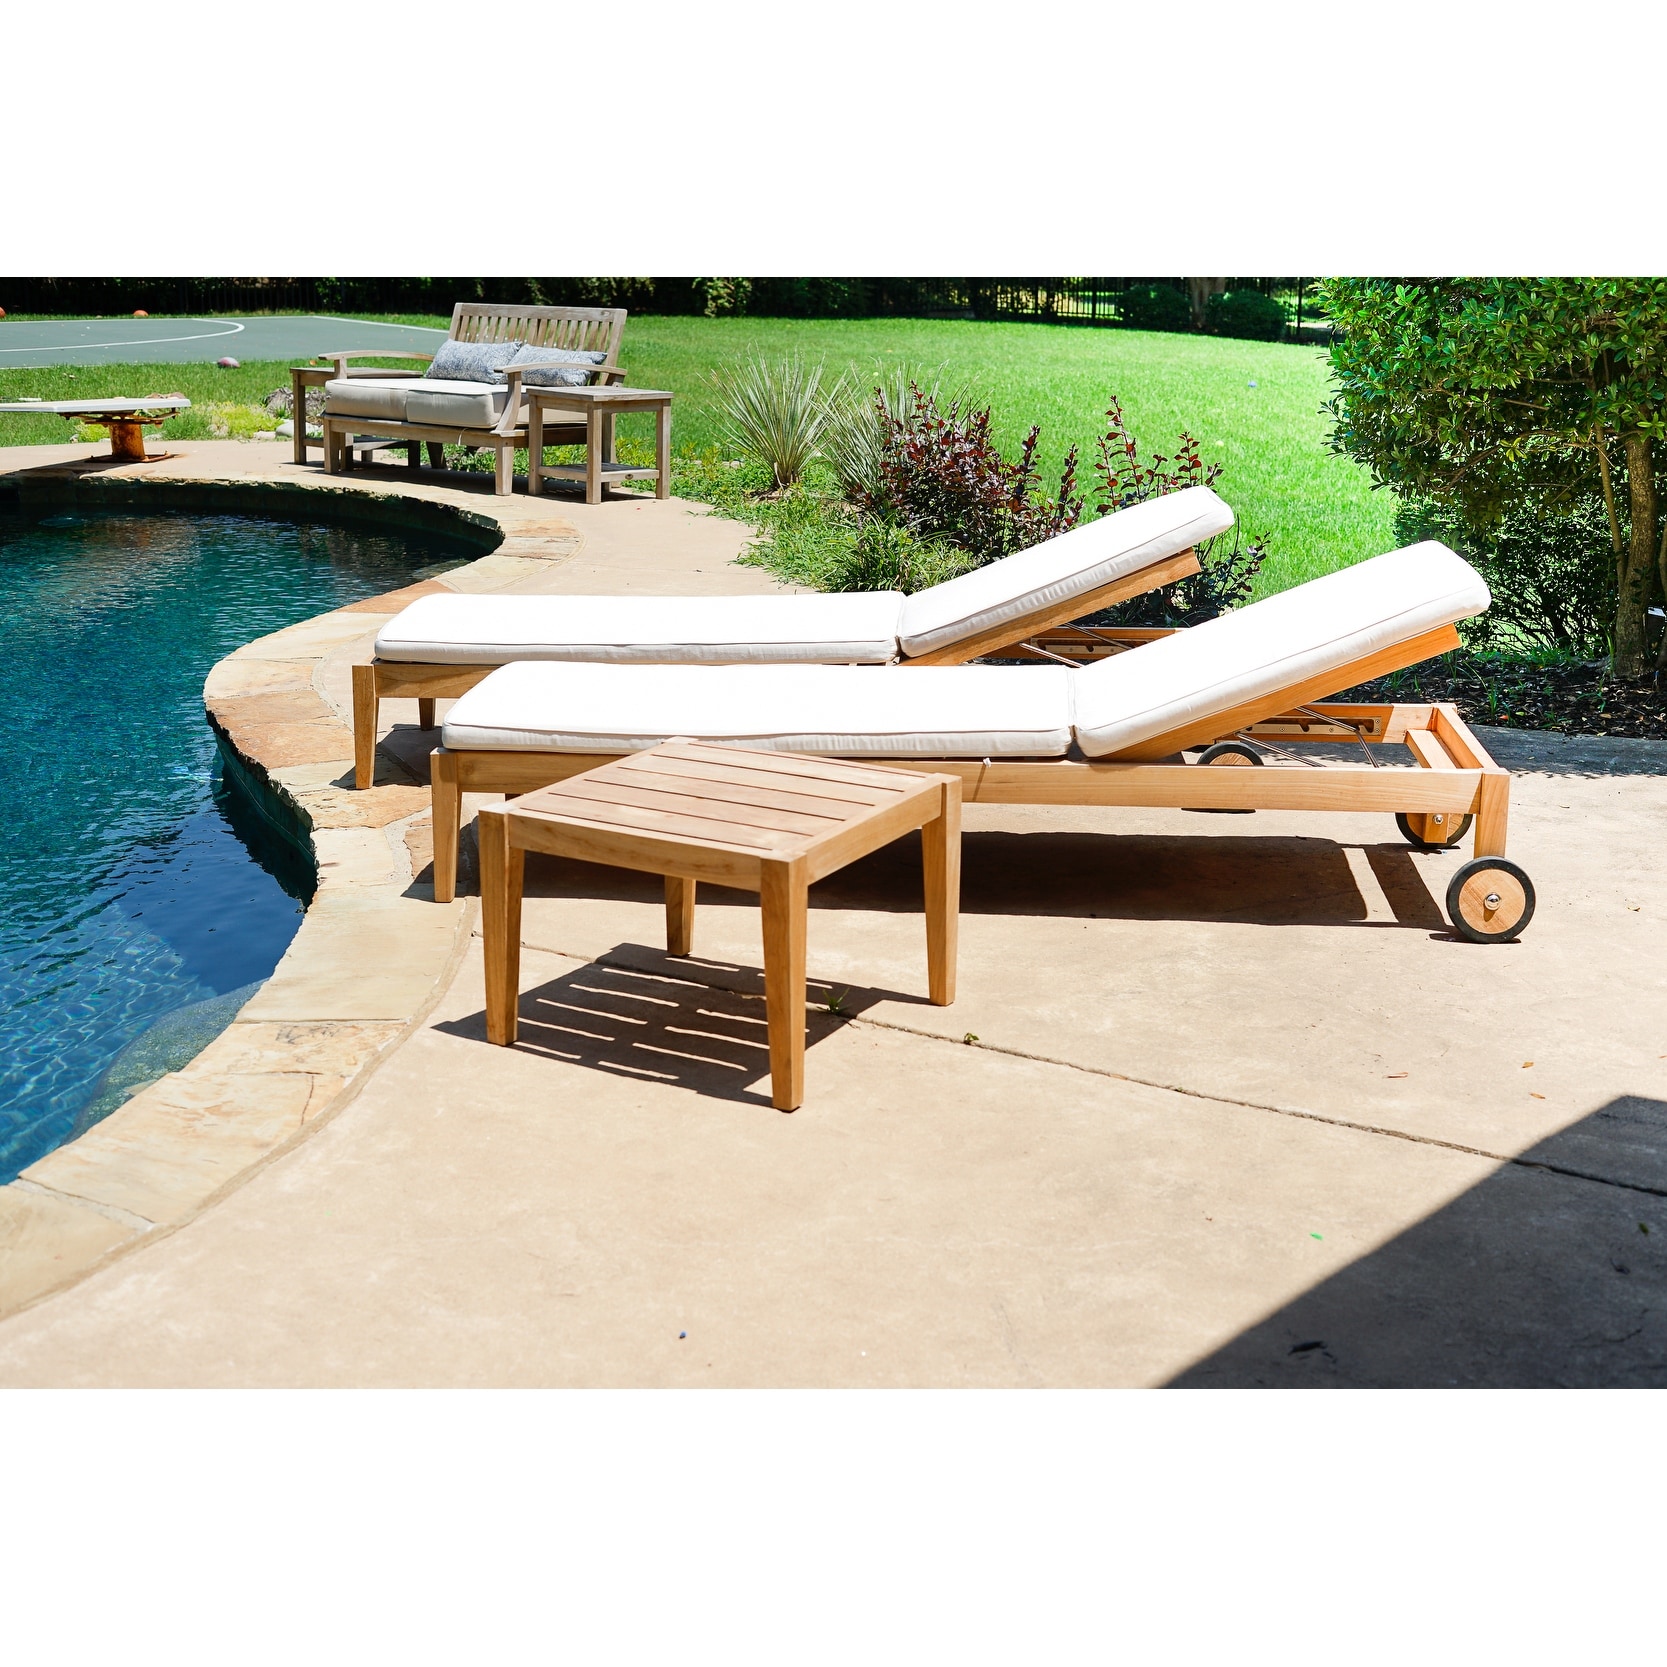 Posh Pollen Teak Outdoor Patio 3-piece Set With Sunbrella Chaise Loungers And Side Table